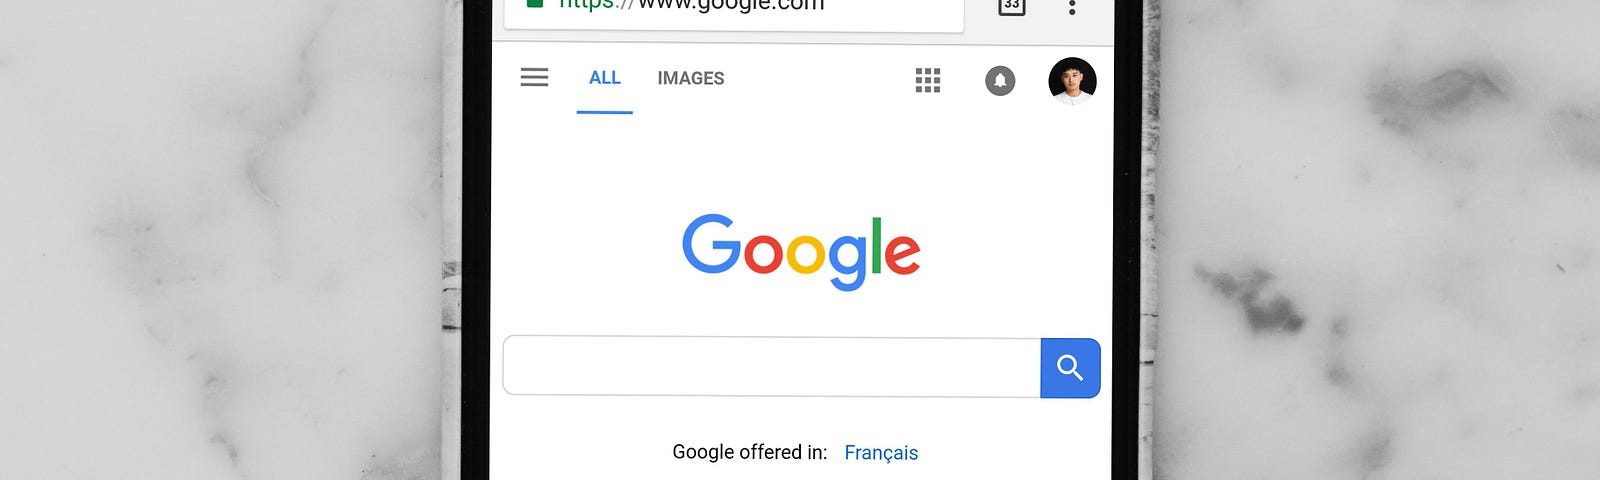 Photo of iPhone with Google Search open.